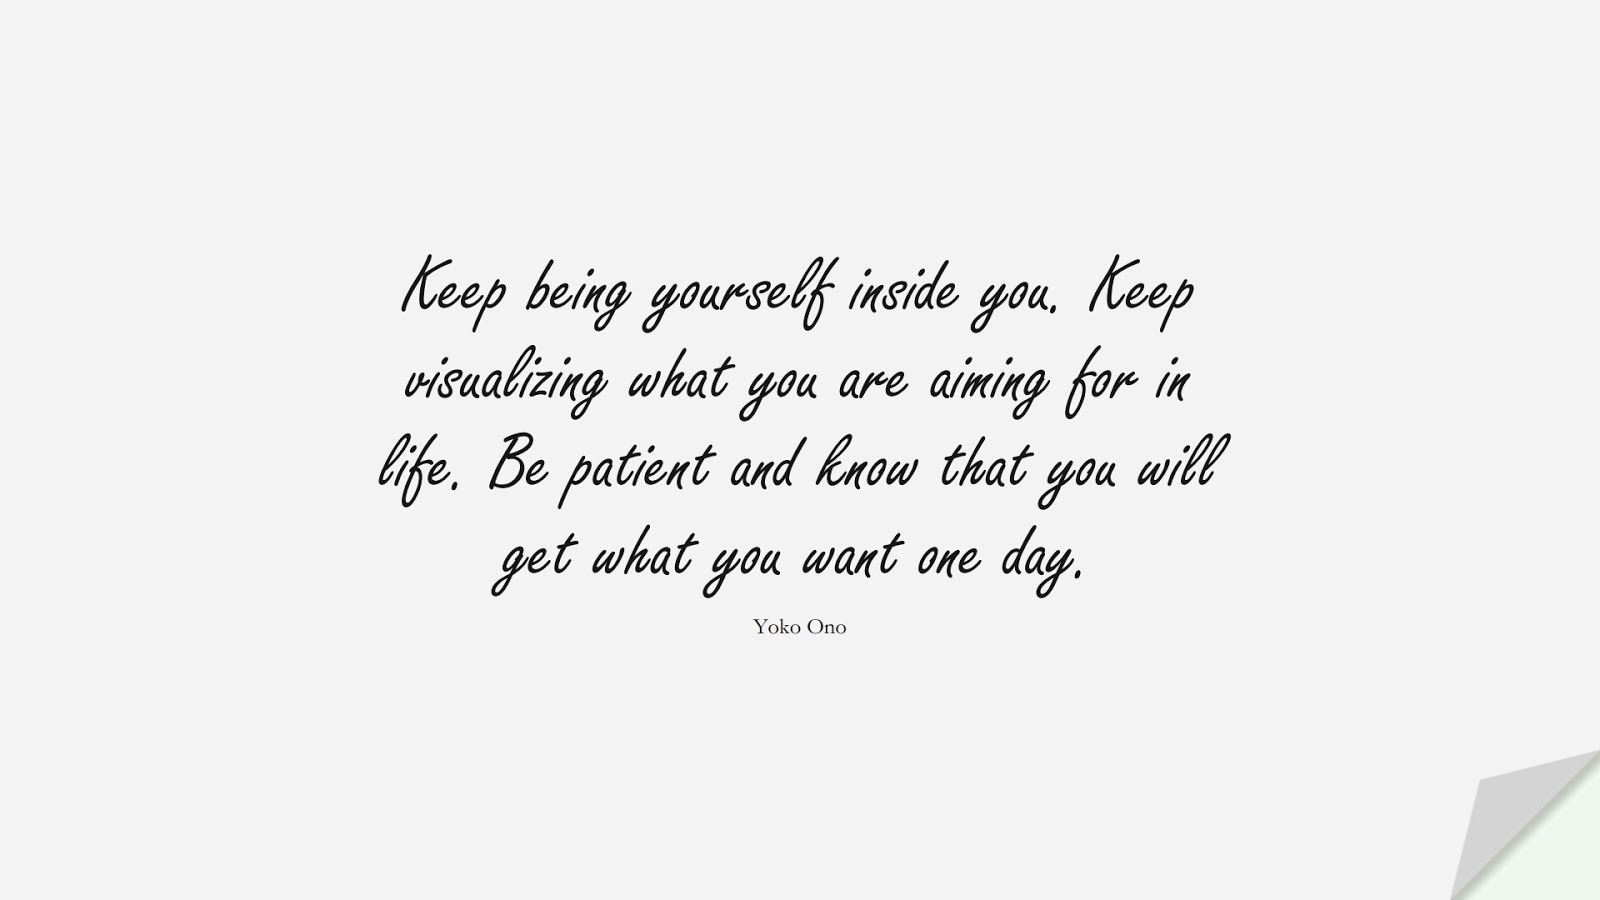 Keep being yourself inside you. Keep visualizing what you are aiming for in life. Be patient and know that you will get what you want one day. (Yoko Ono);  #BeYourselfQuotes